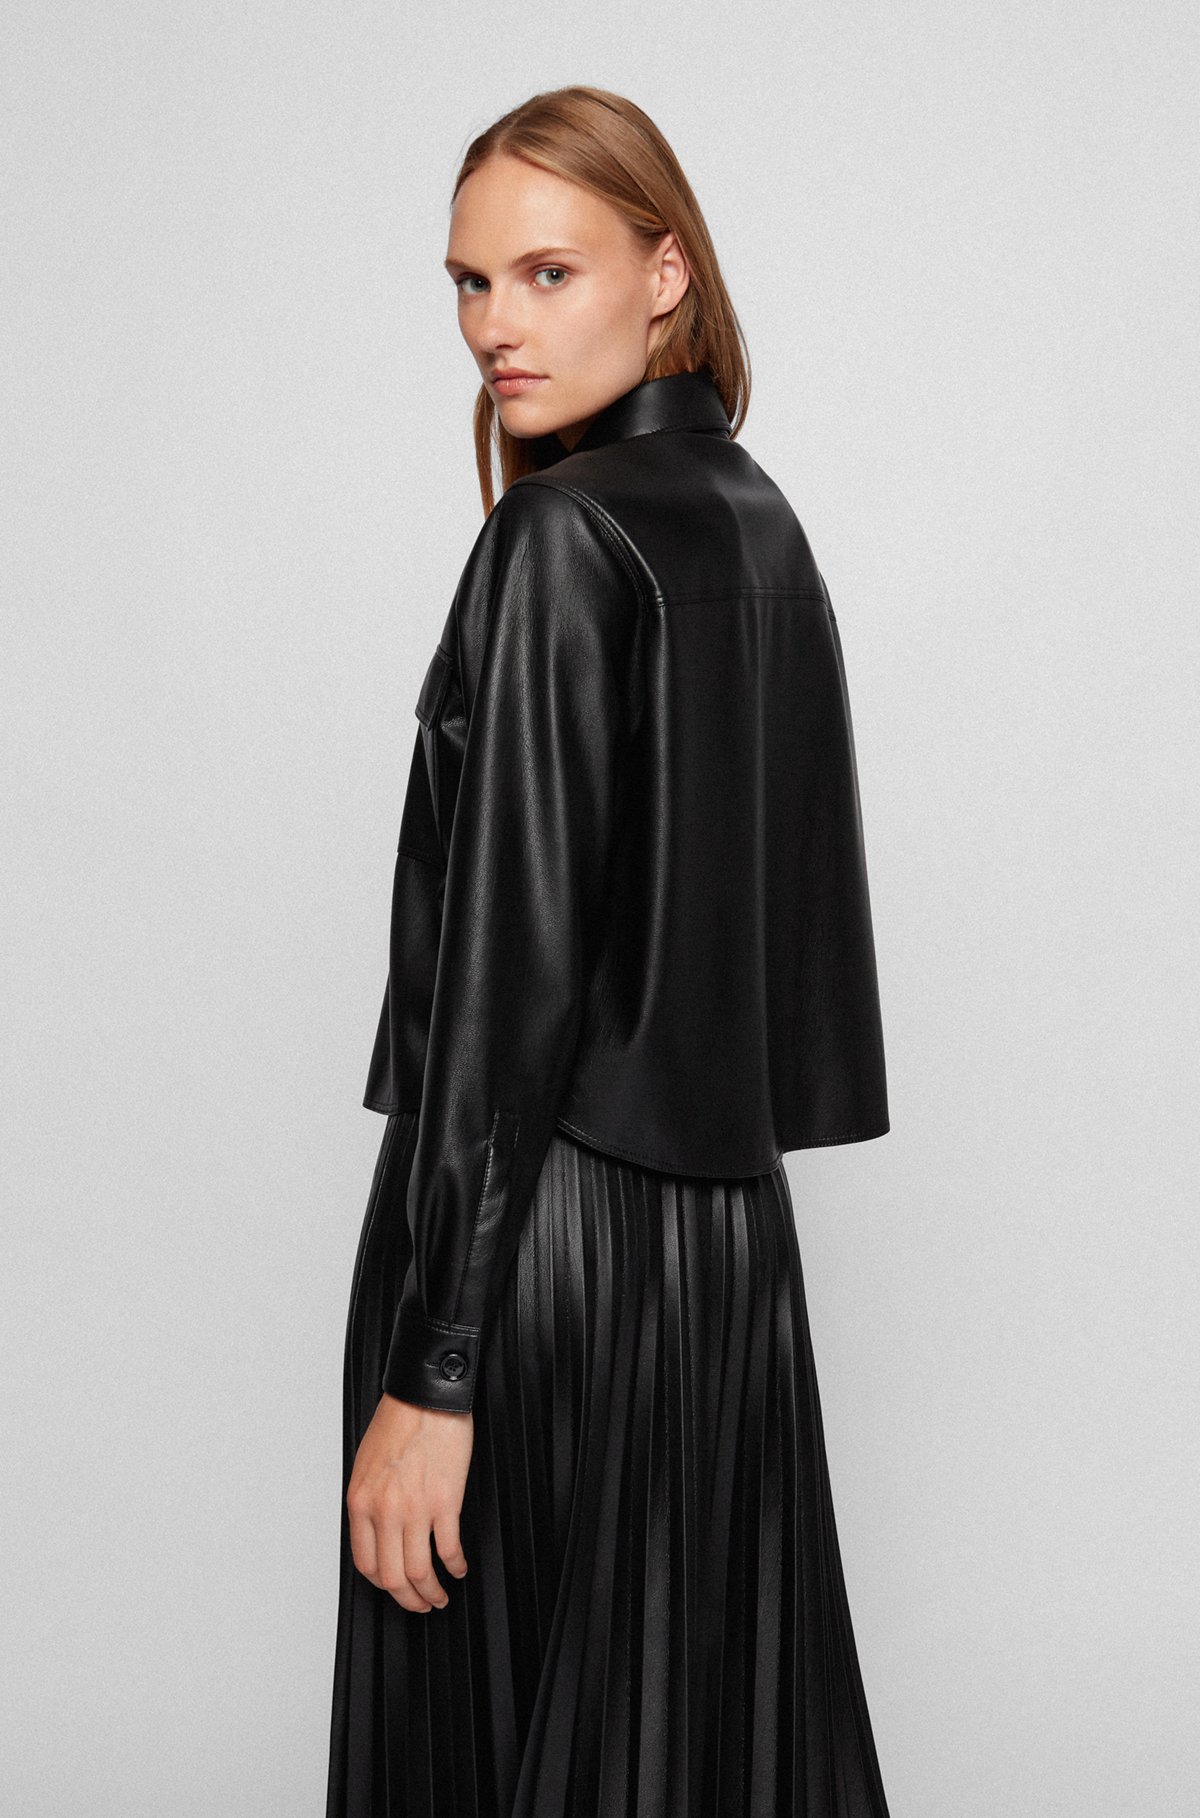 Cropped regular-fit shirt in faux leather, Black